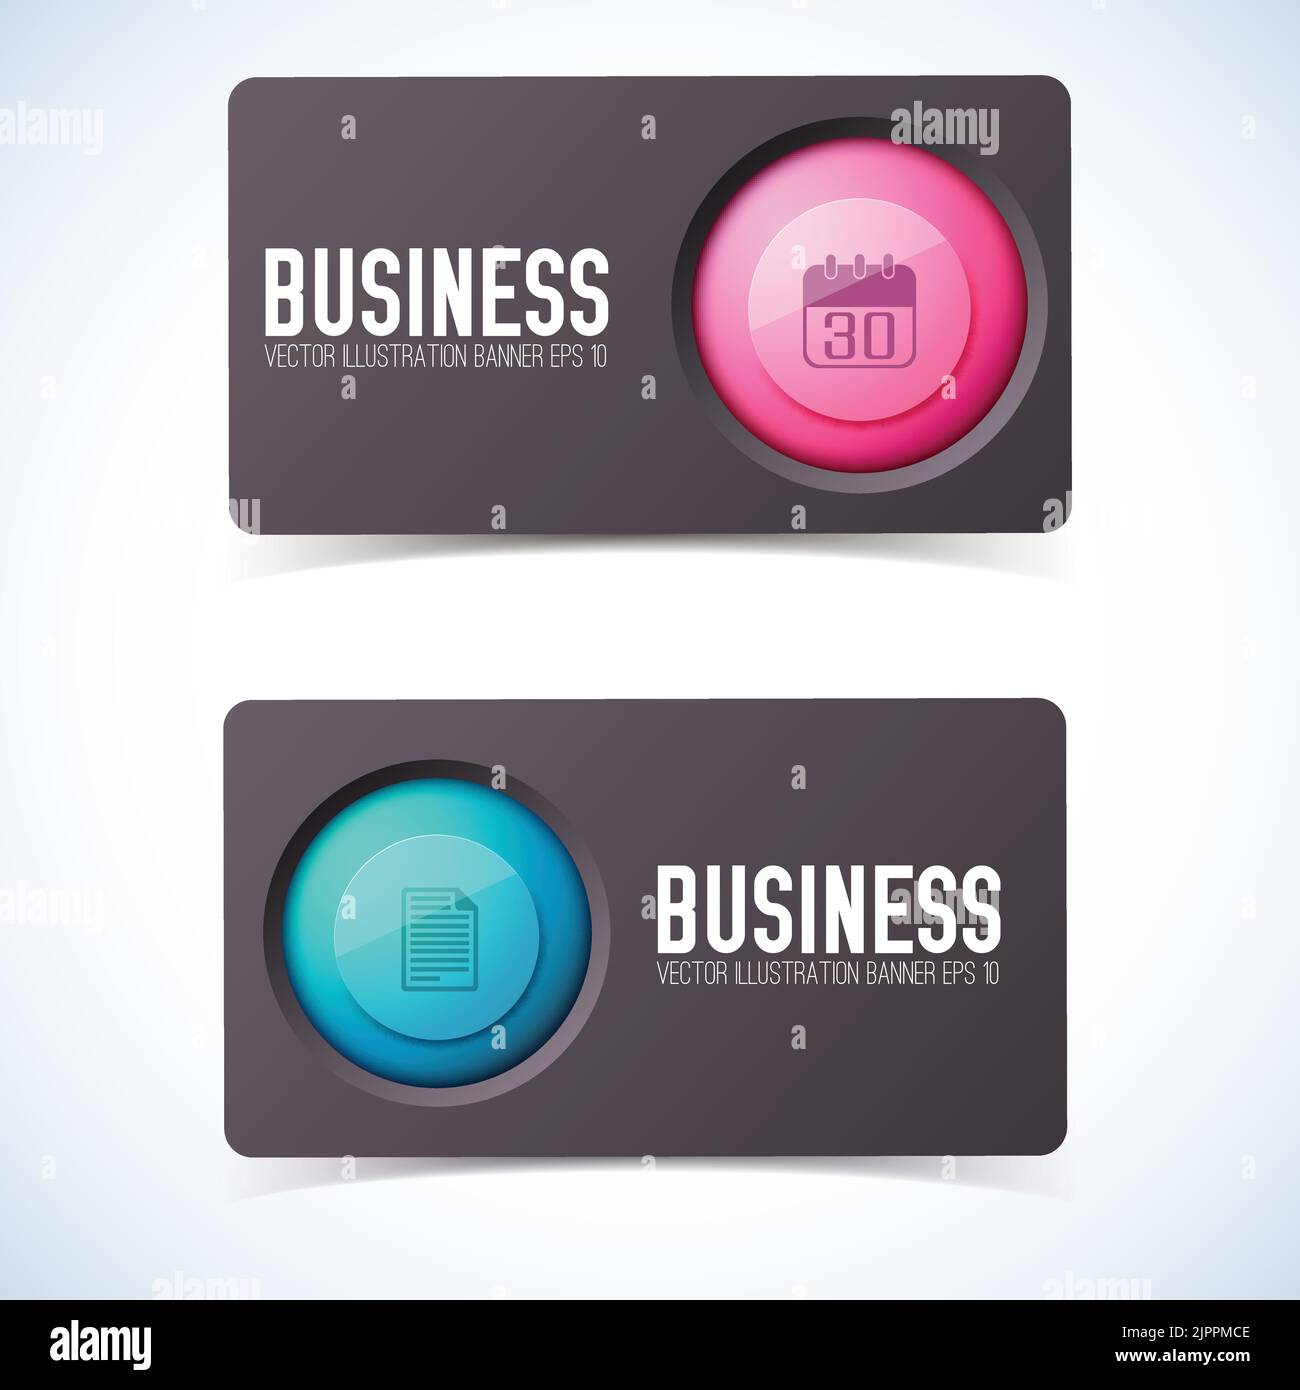 Infographic design concept with two isolated business cards horizontal banners each with round pictogram and text vector illustration Stock Vector